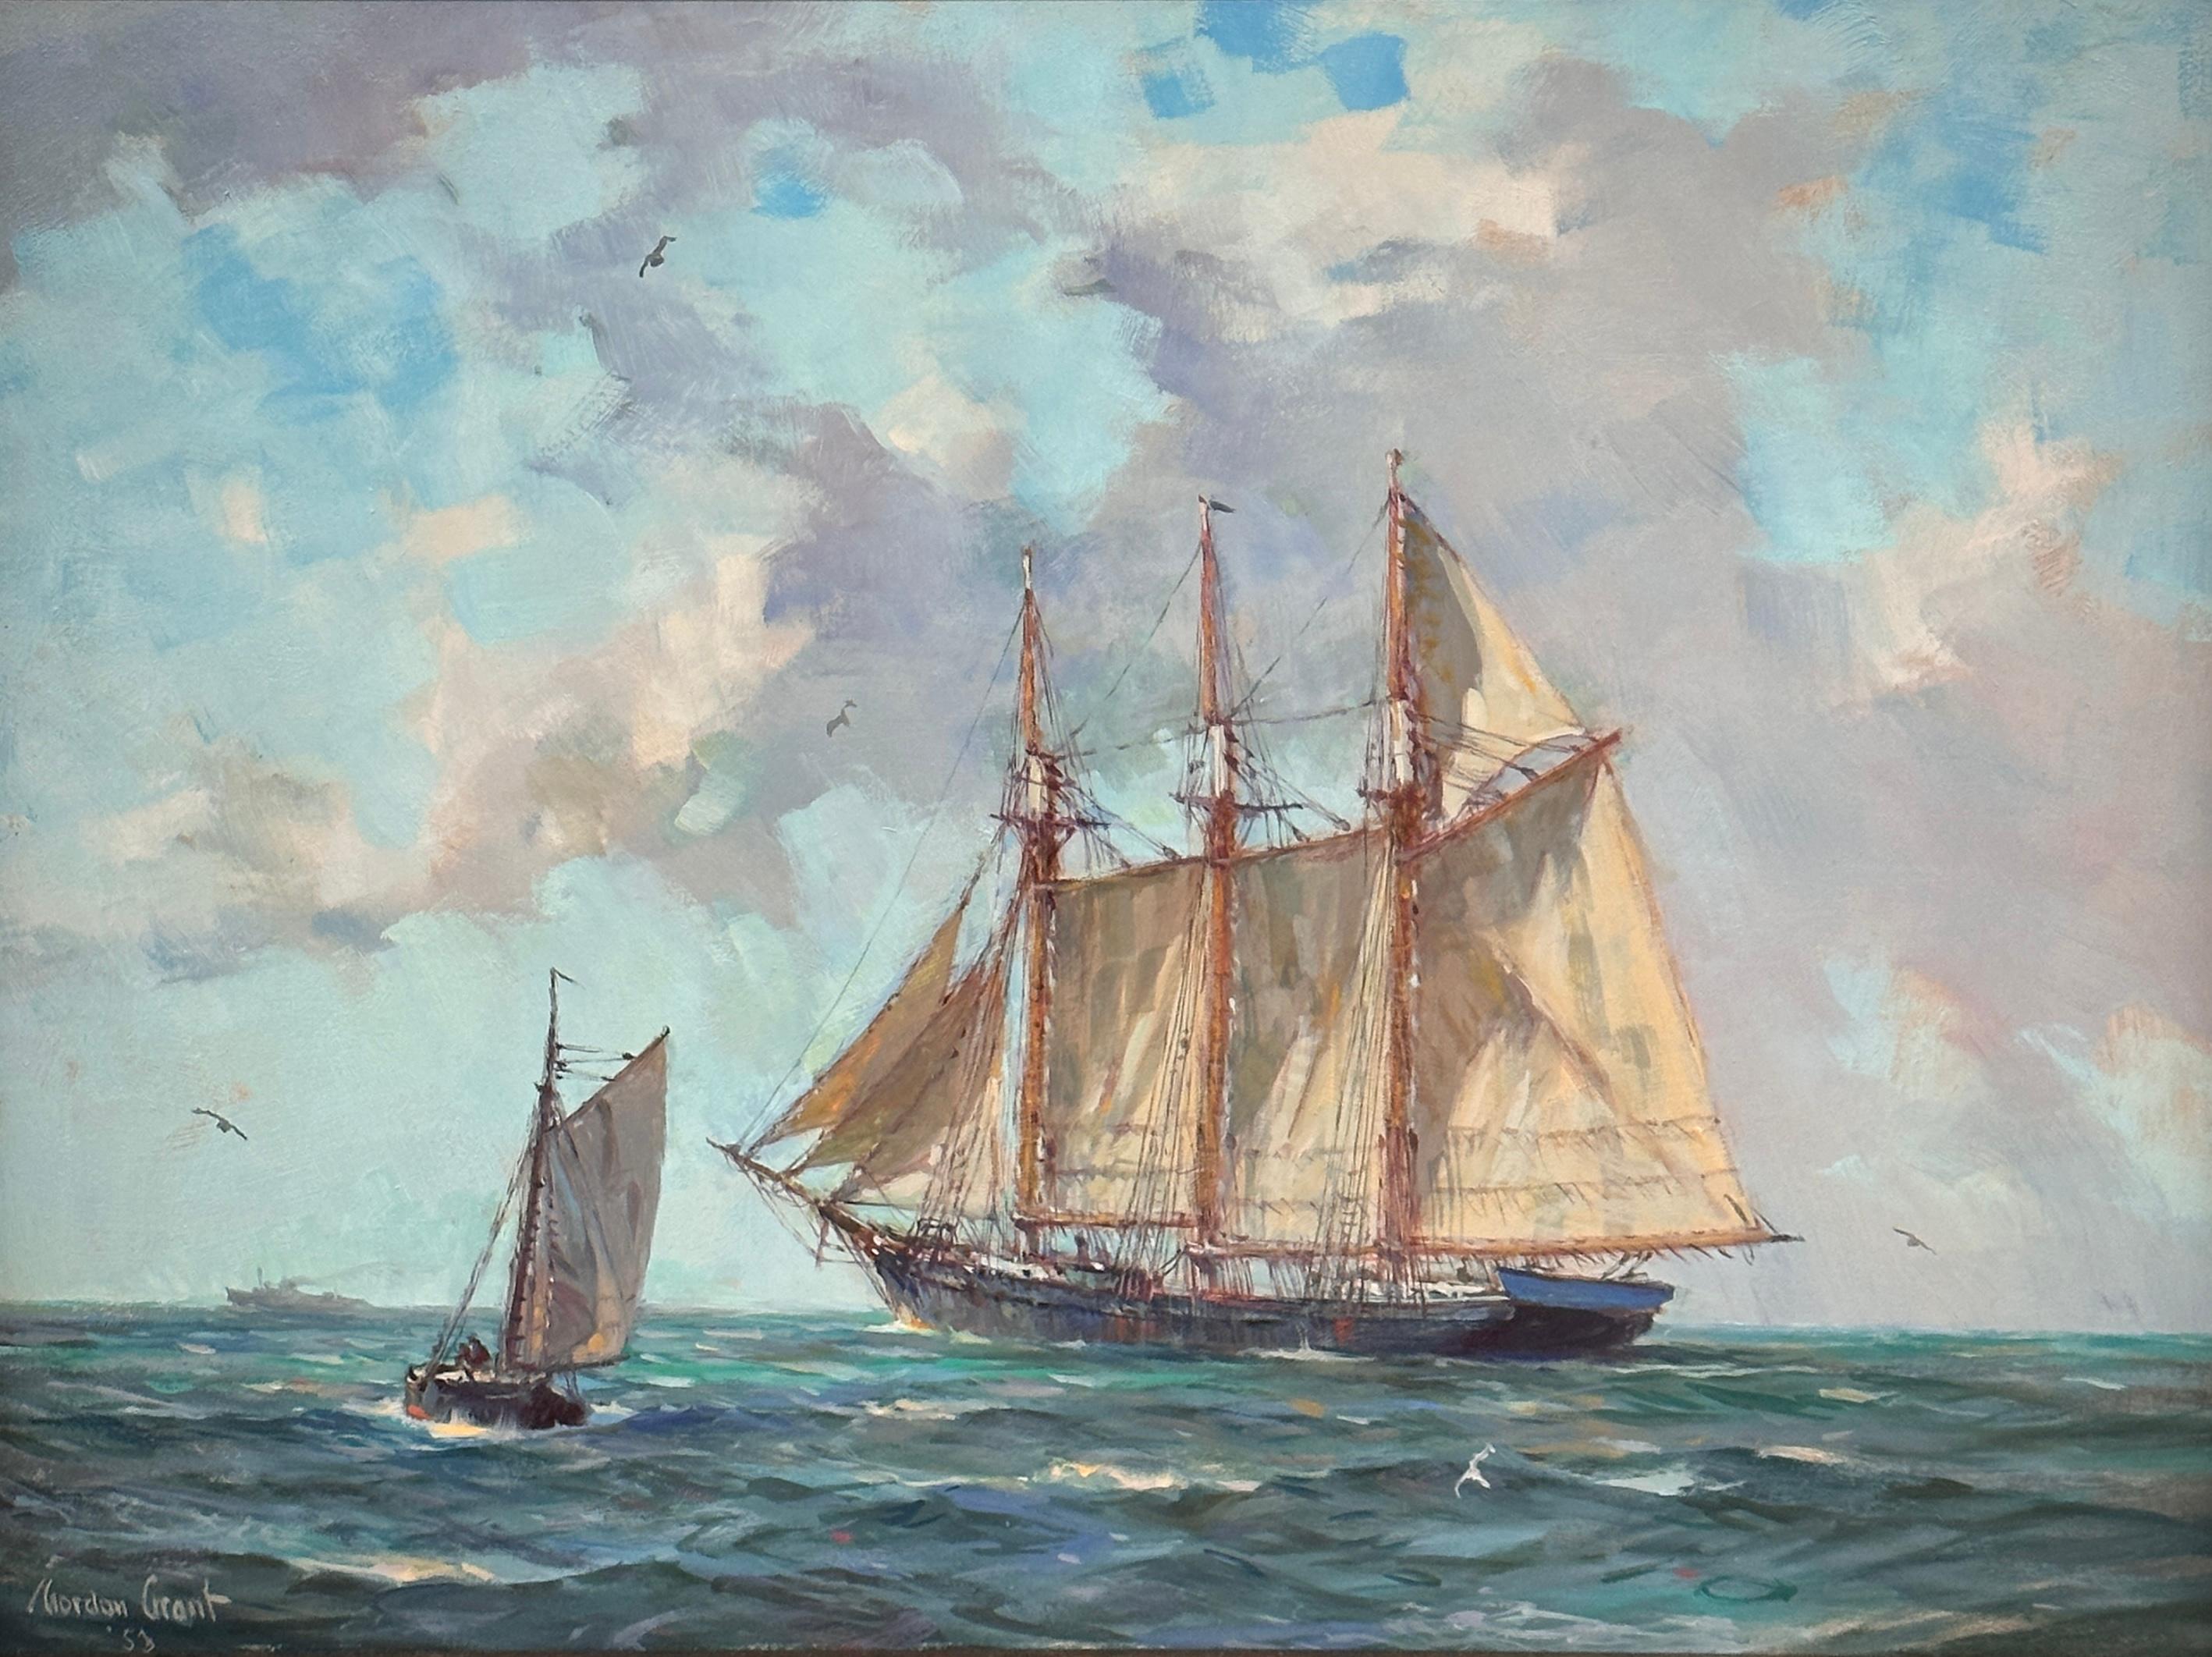 Gordon Grant Landscape Painting - Fore and Aft, marine seascape painting from 1950s with three masted schooner 